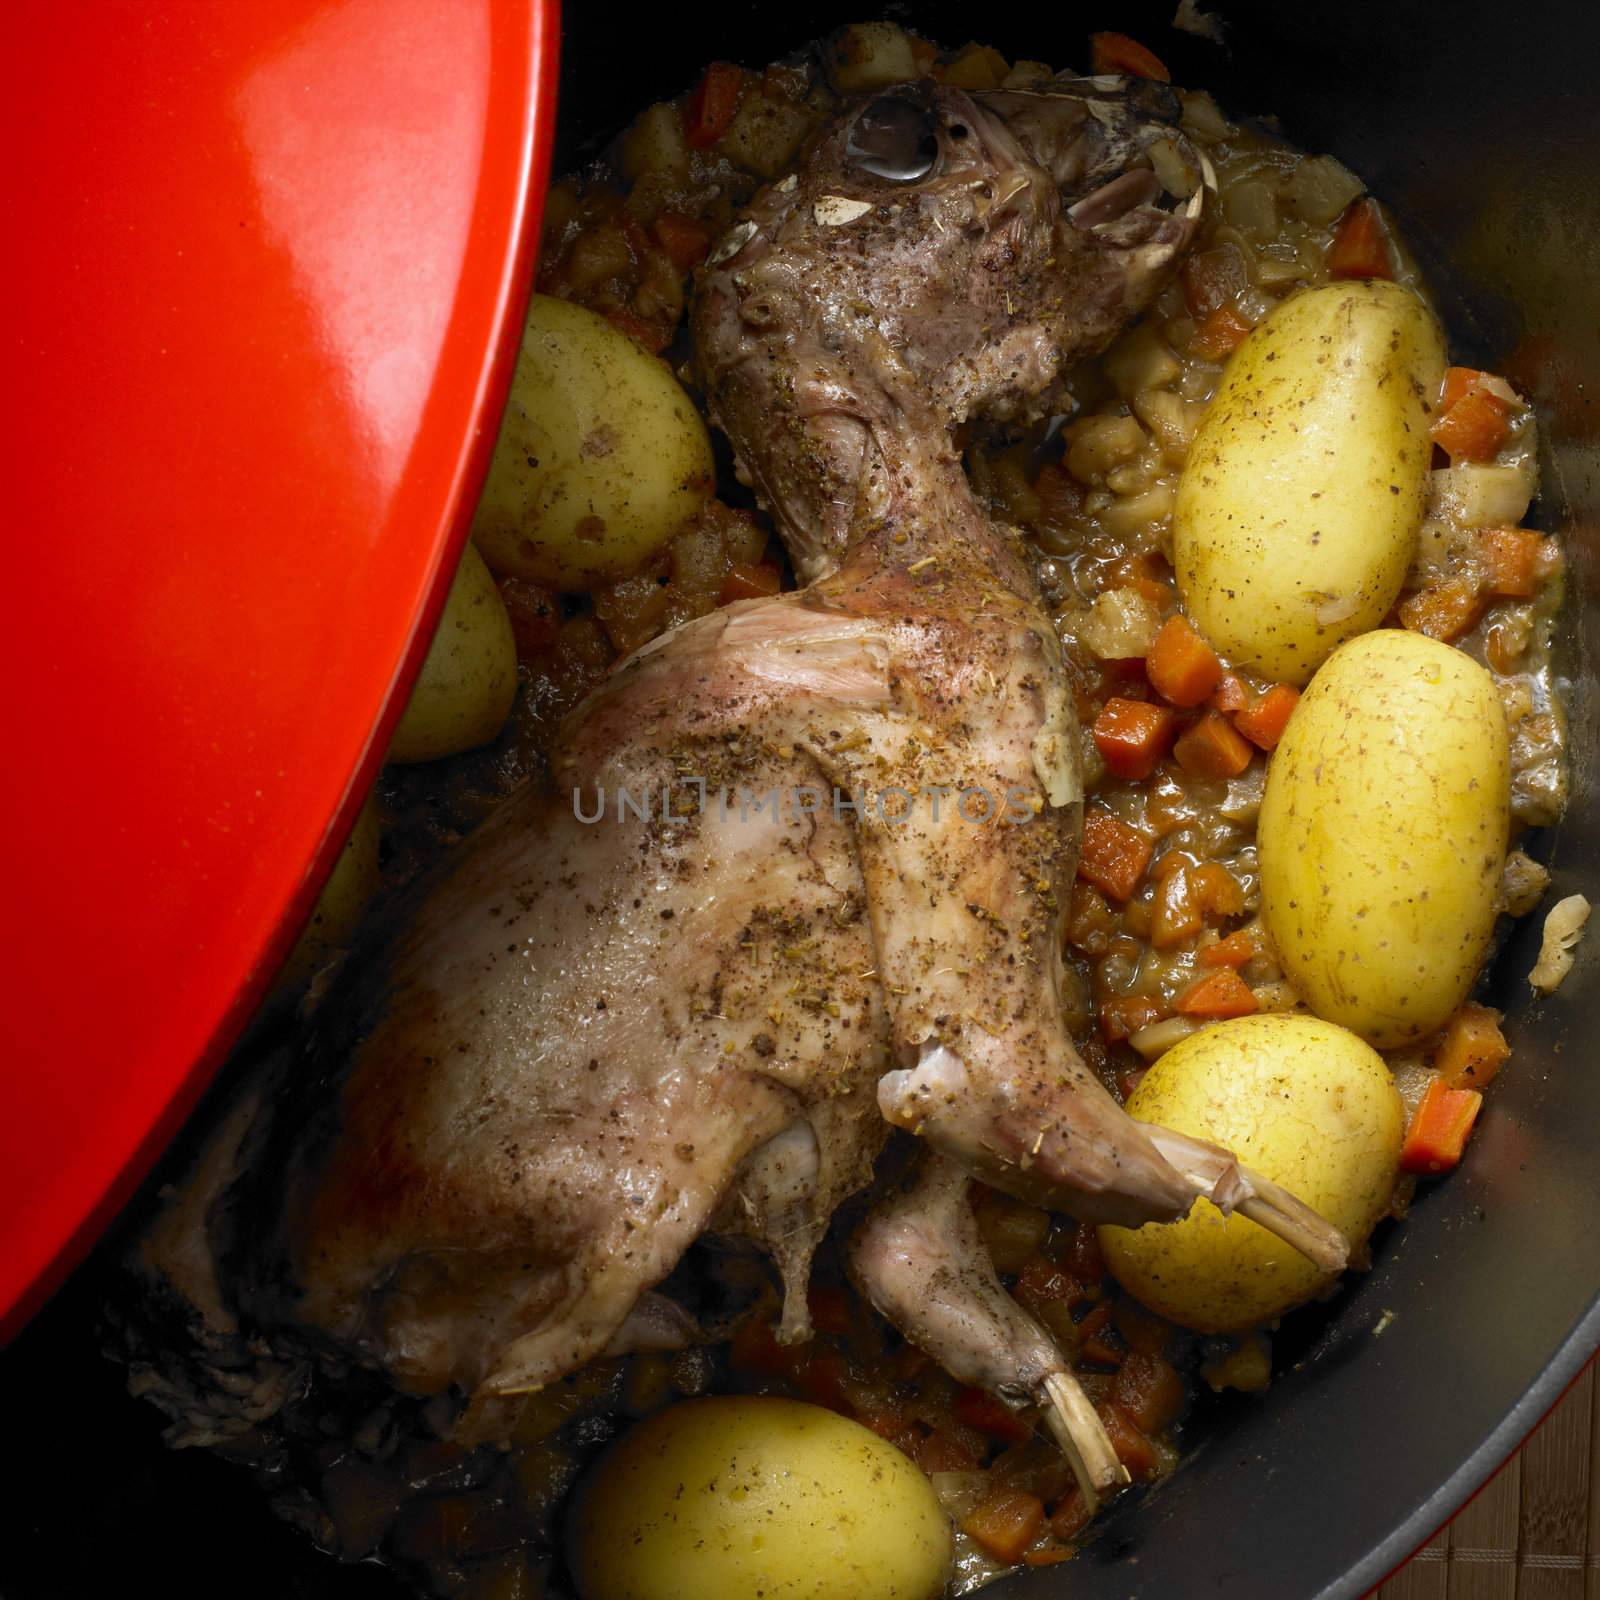 rabbit with side-dish from one pot by phbcz